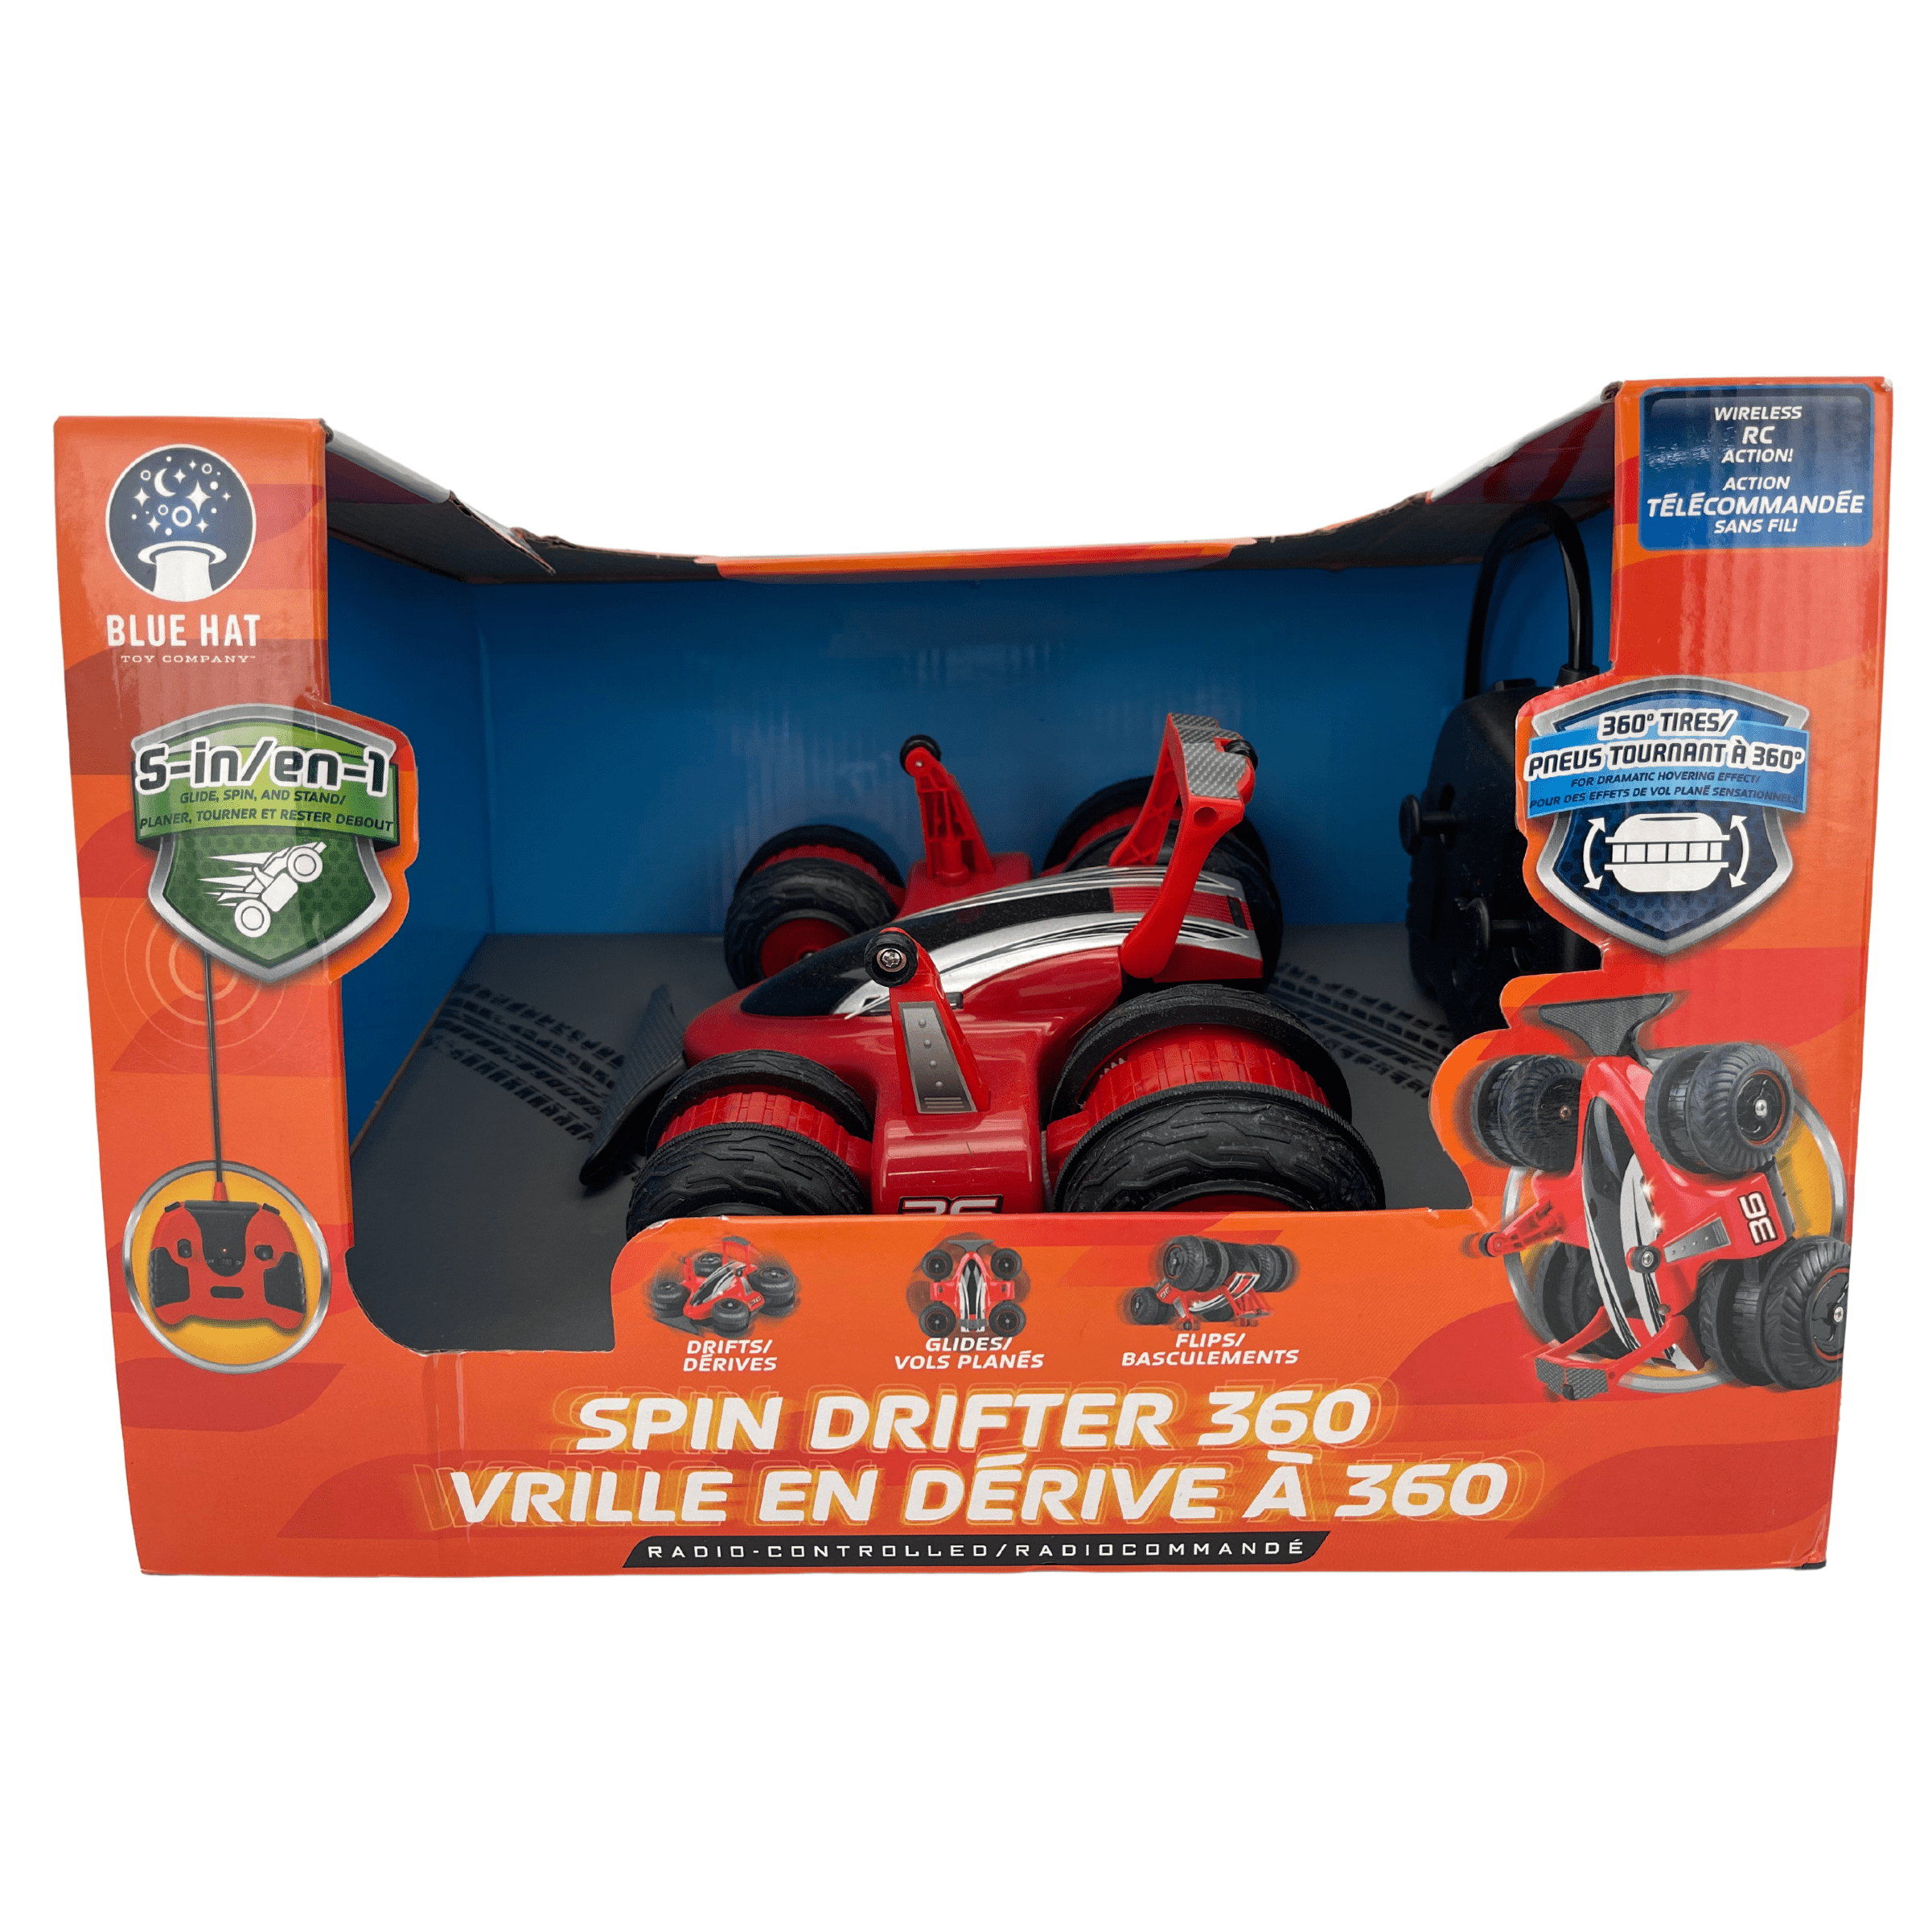 Blue Hat Spin Drifter 360 RC Car / 5-in-1 Stunt Vehicle / Red **DEALS**